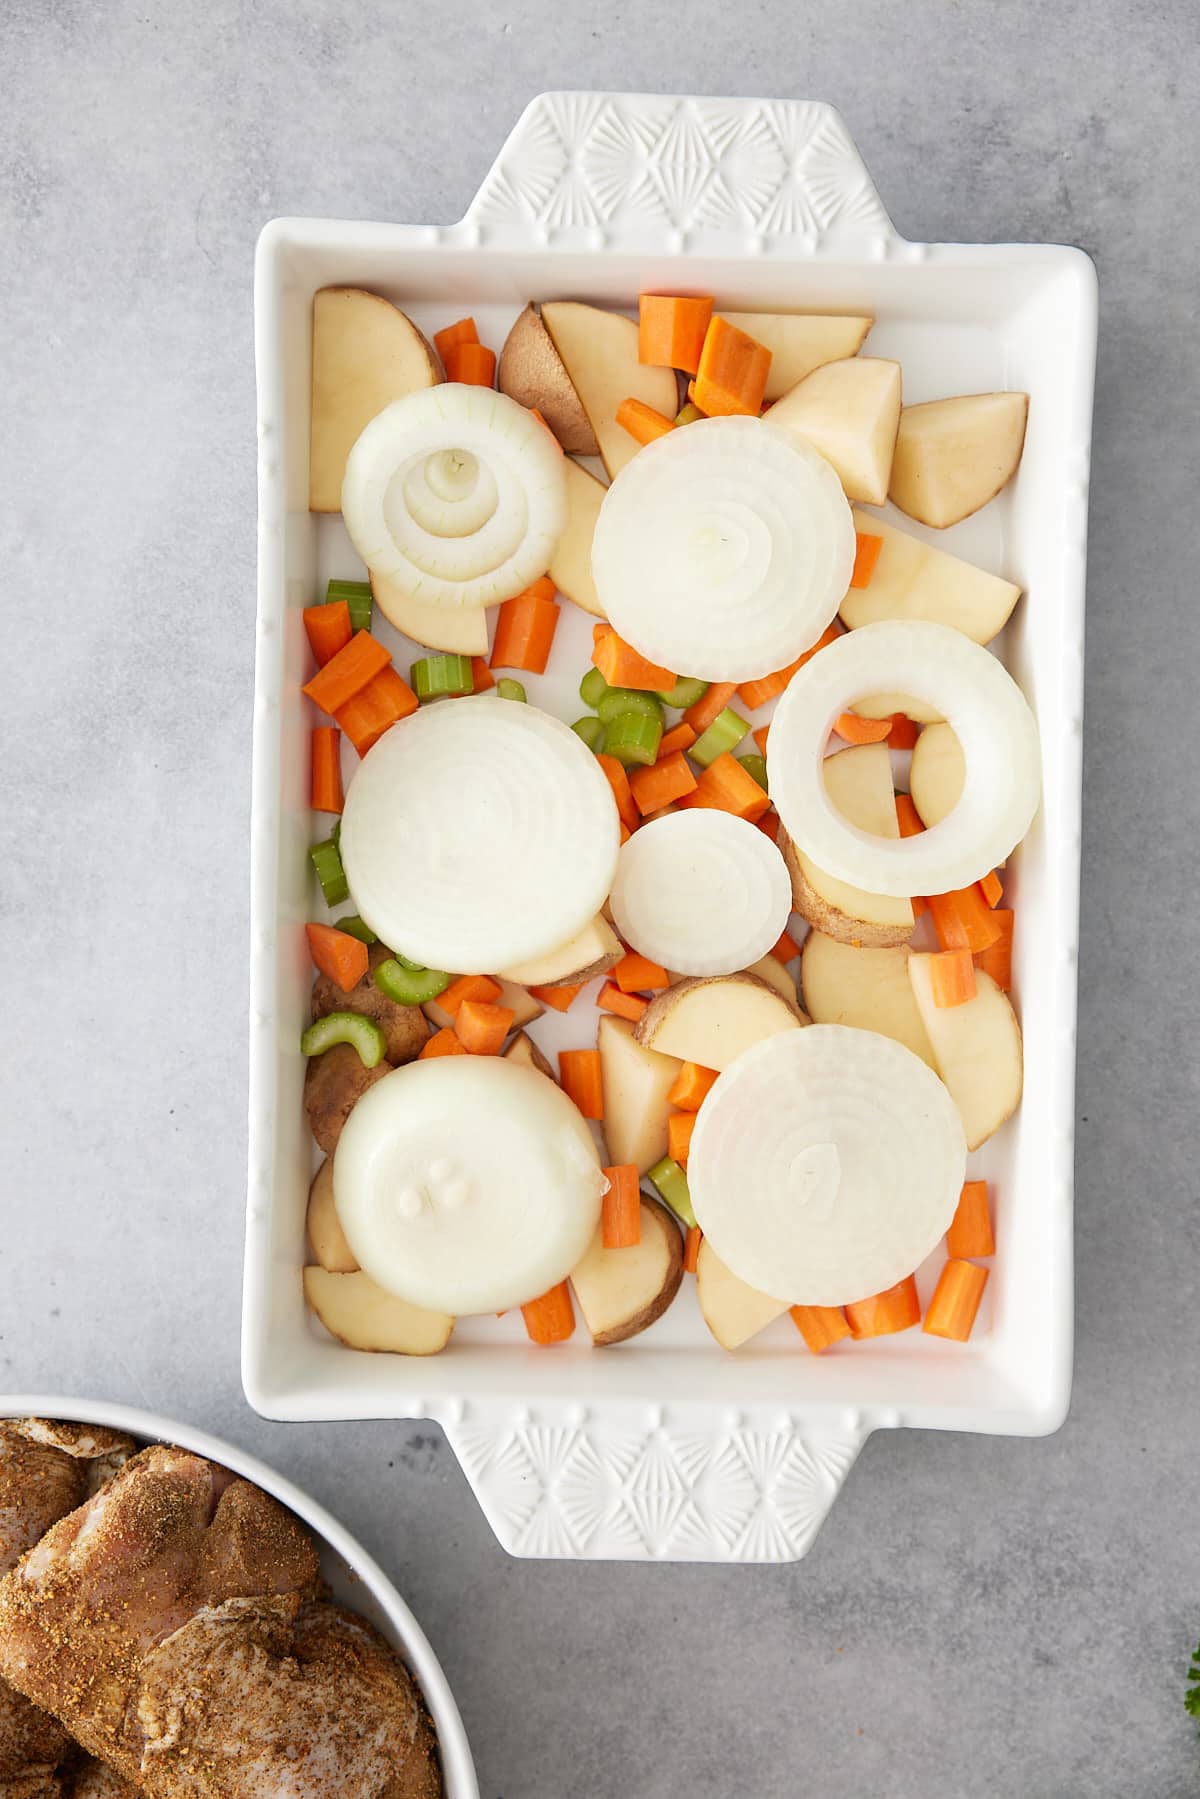 White oven proof dish containing layer of vegetables including potato carrots, celery and onion